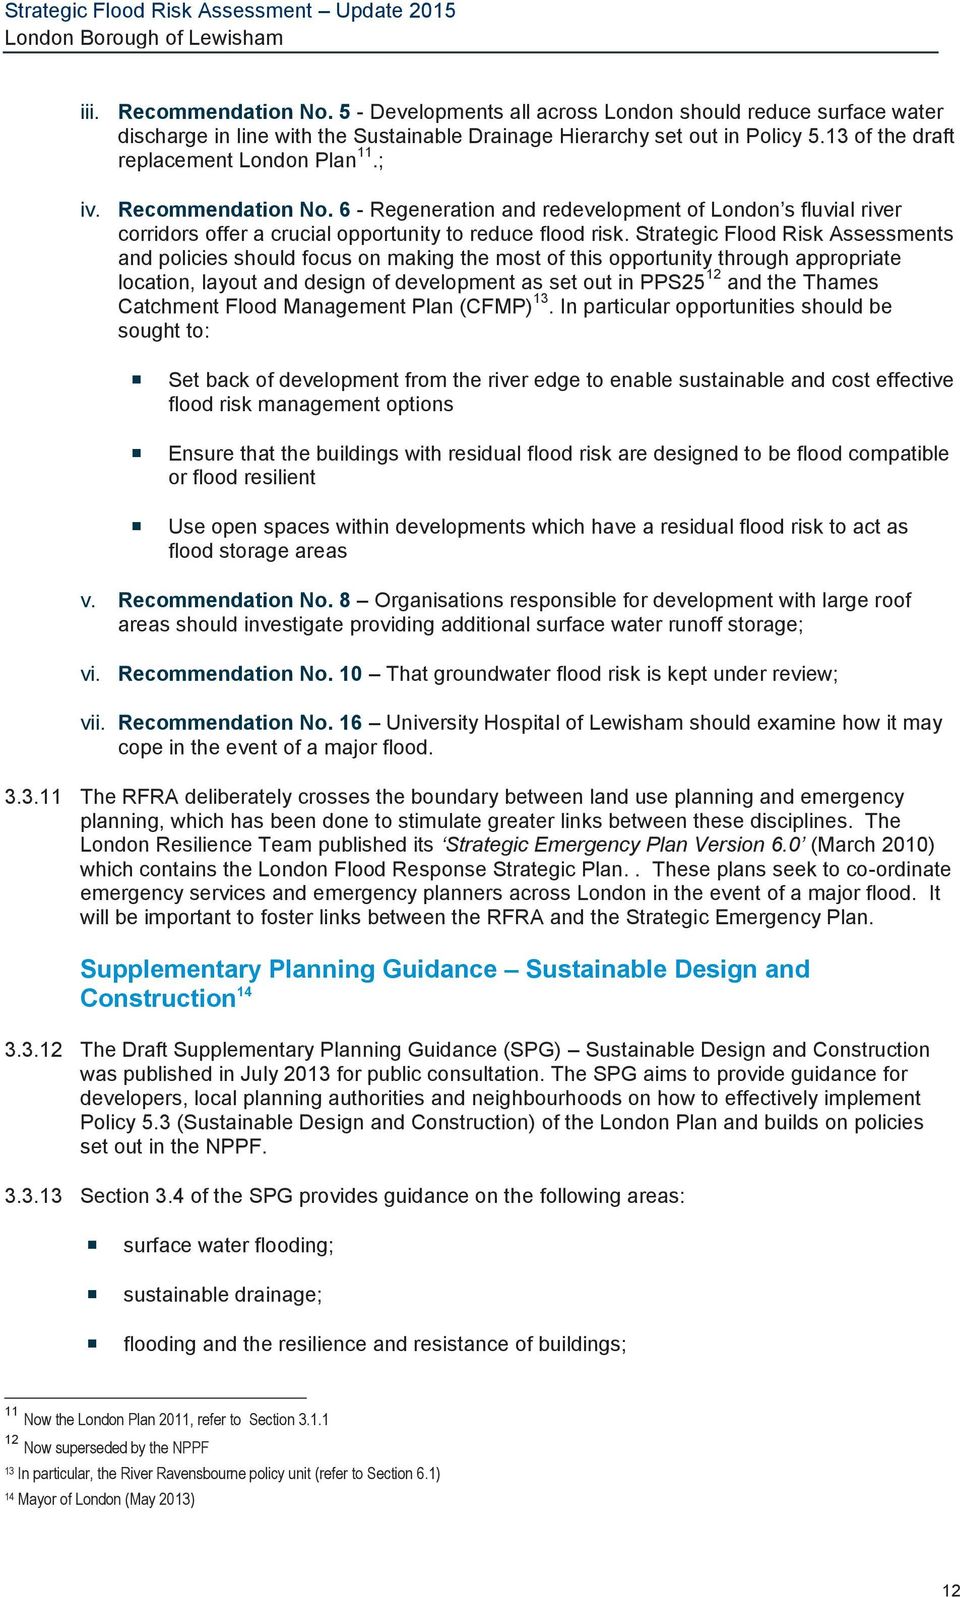 Strategic Flood Risk Assessments and policies should focus on making the most of this opportunity through appropriate location, layout and design of development as set out in PPS25 12 and the Thames